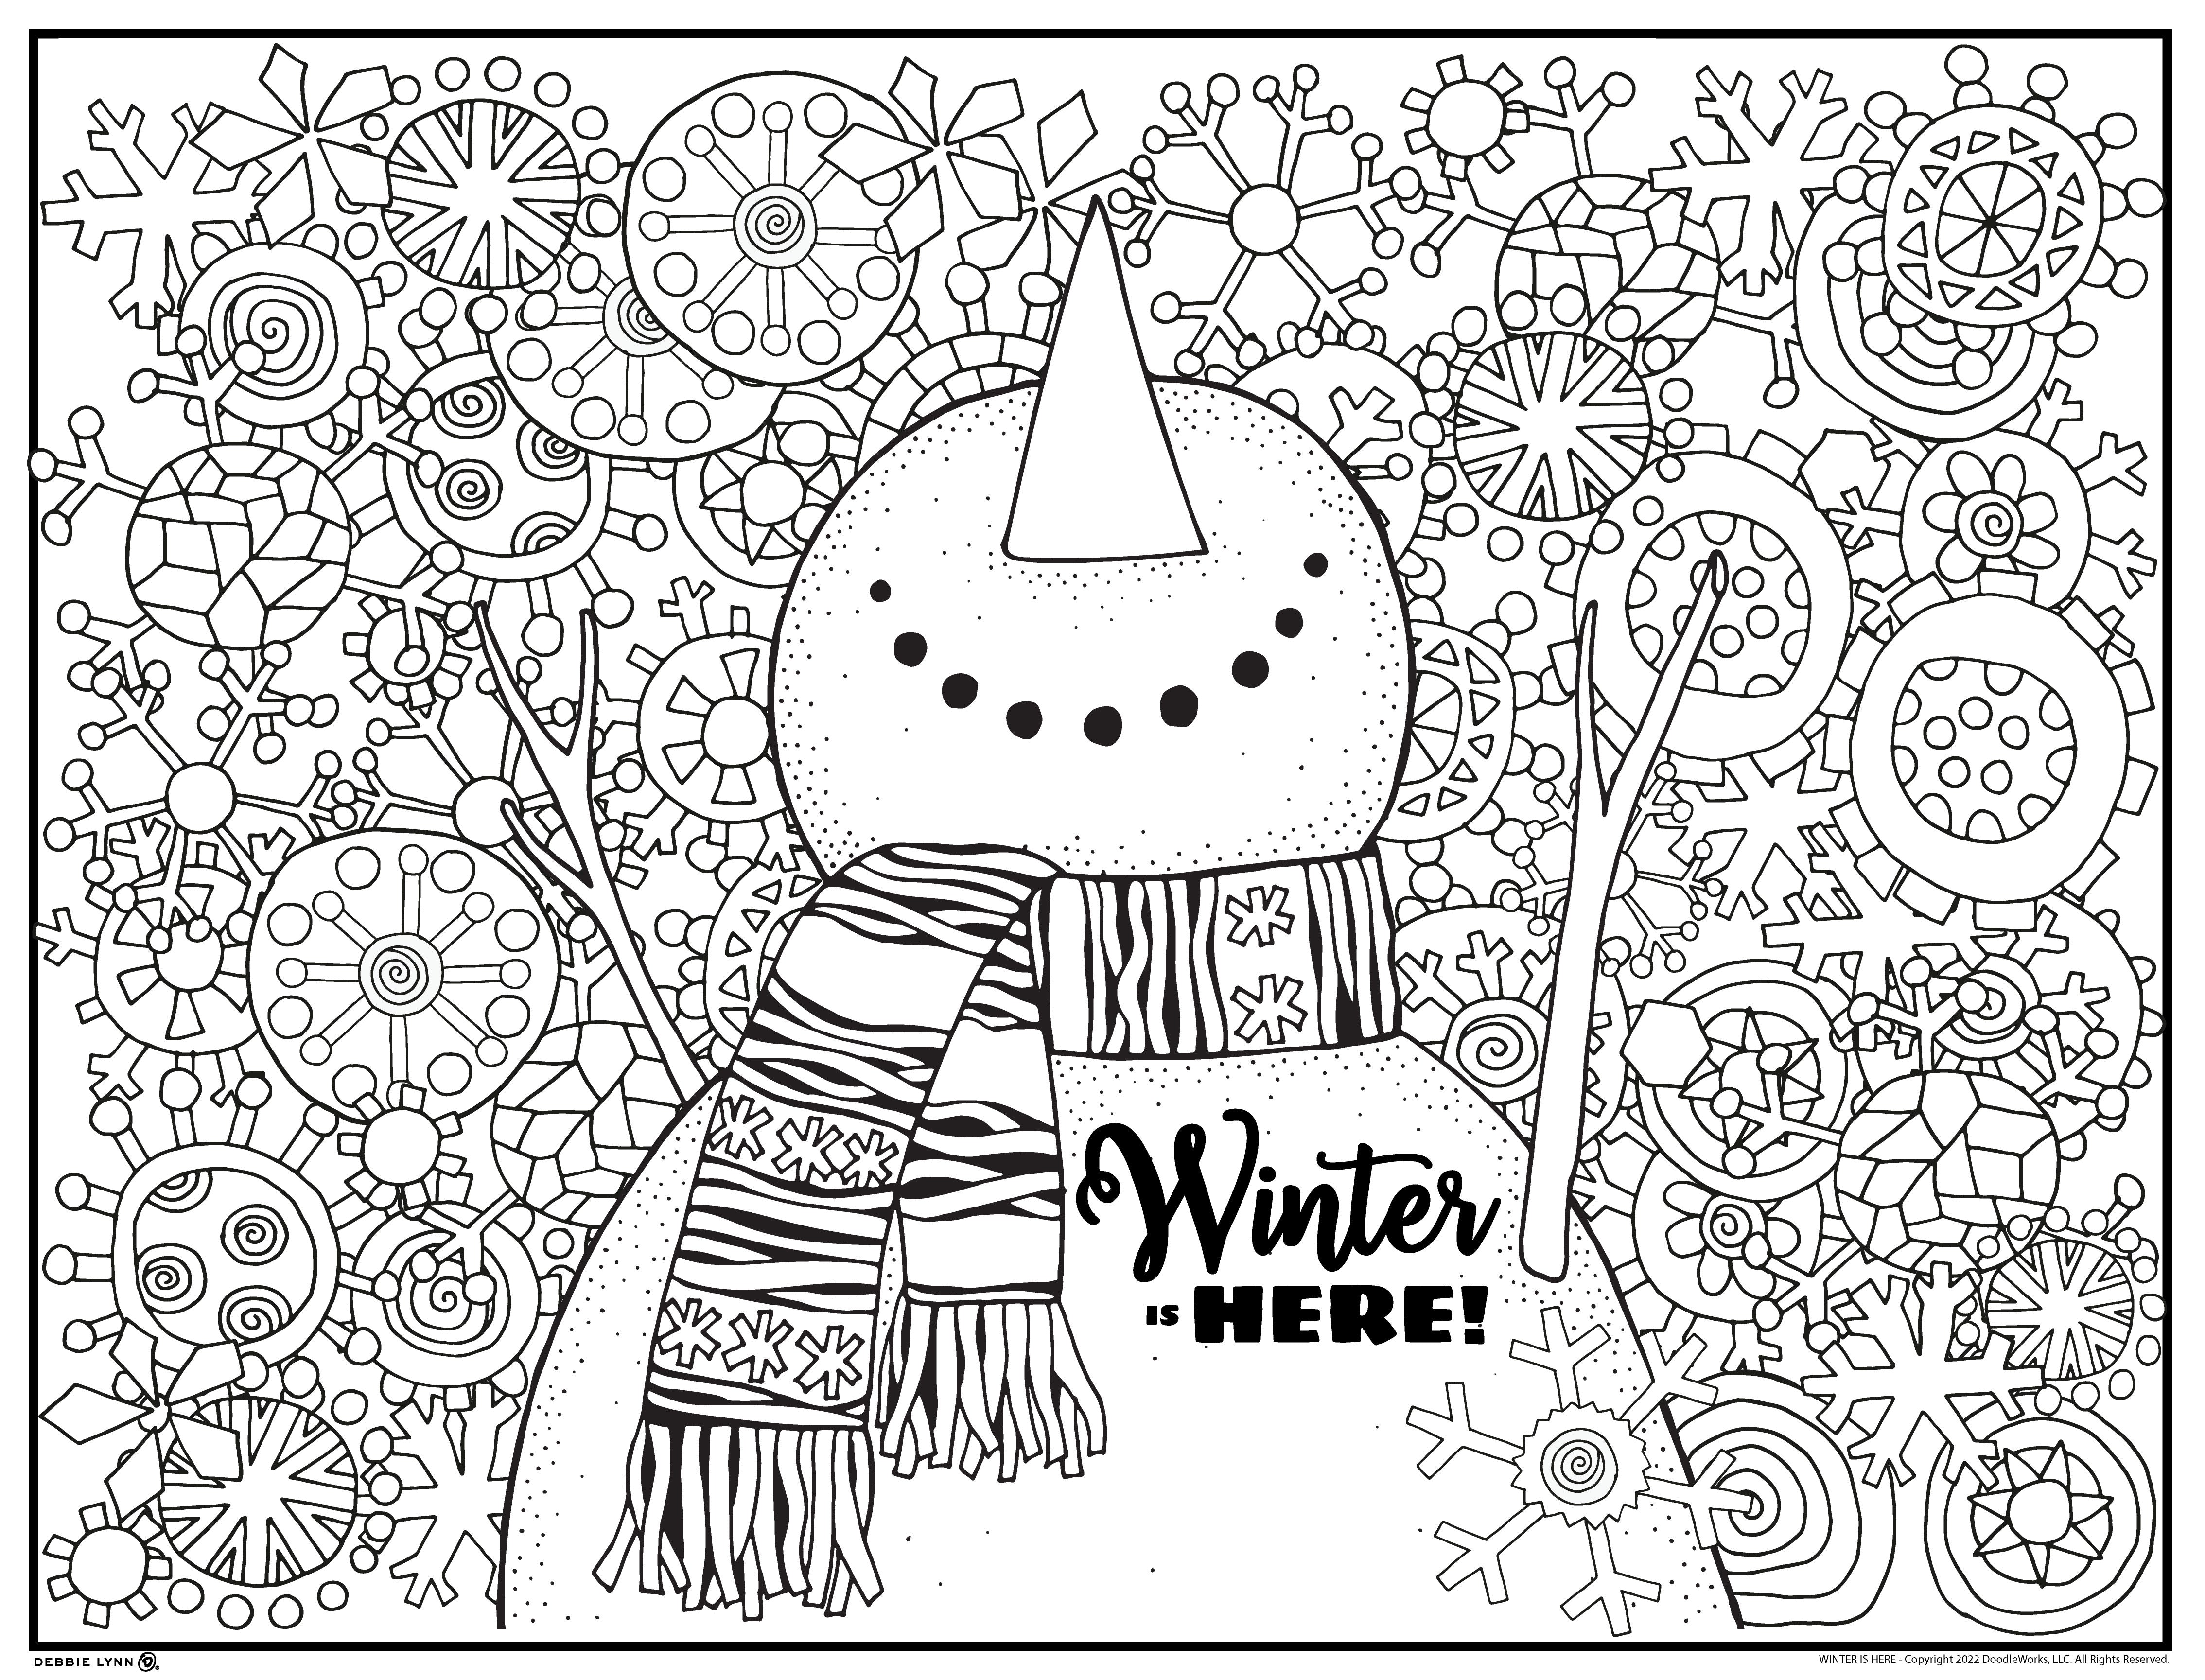 Winter is Here! Personalized Giant Coloring Poster 48x63